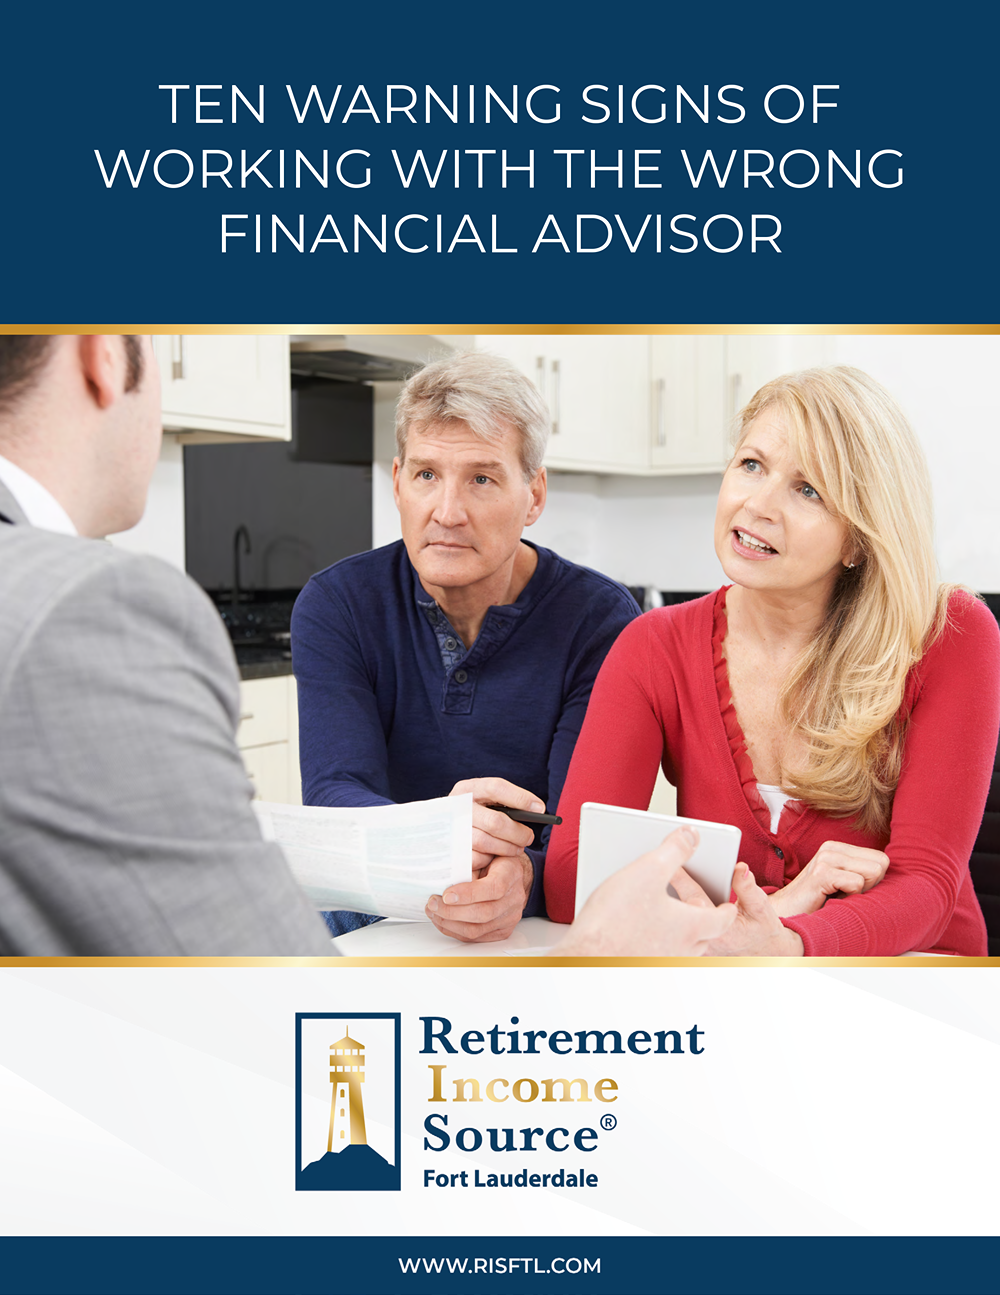 Ten Warning Signs of Working with the Wrong Financial Advisor